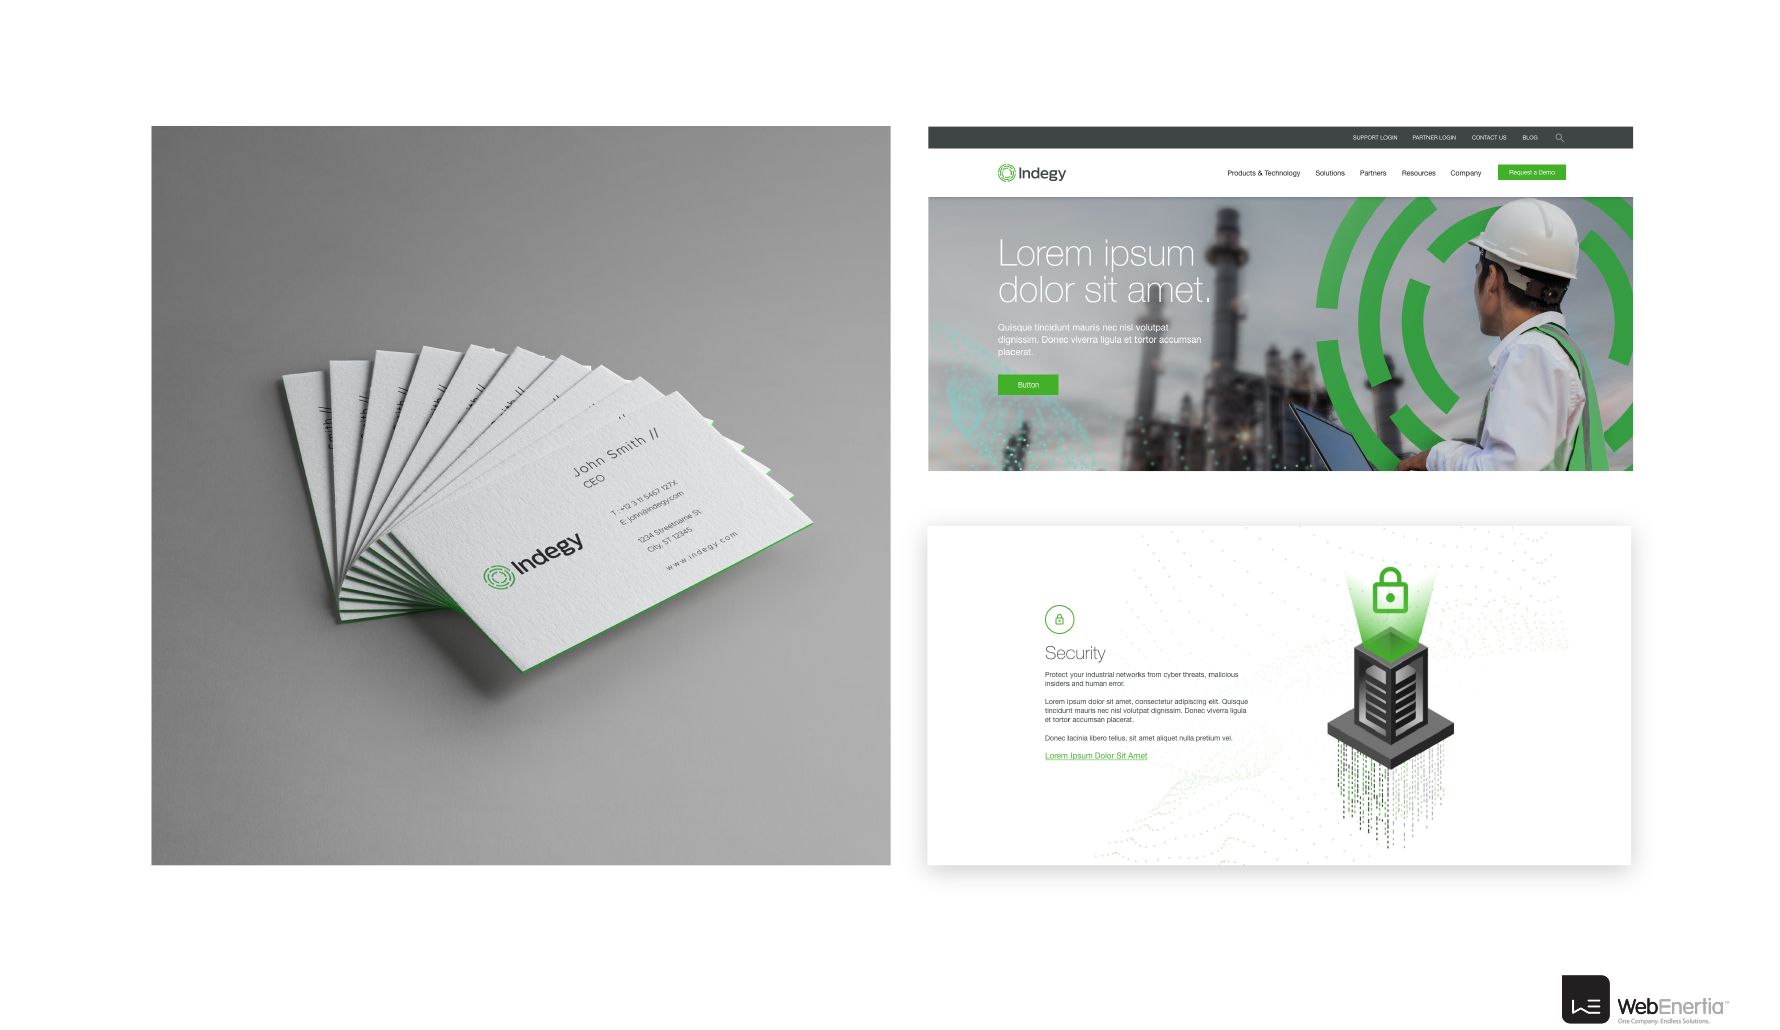 Indegy Brand Update & Guidelines business cards and website mockup